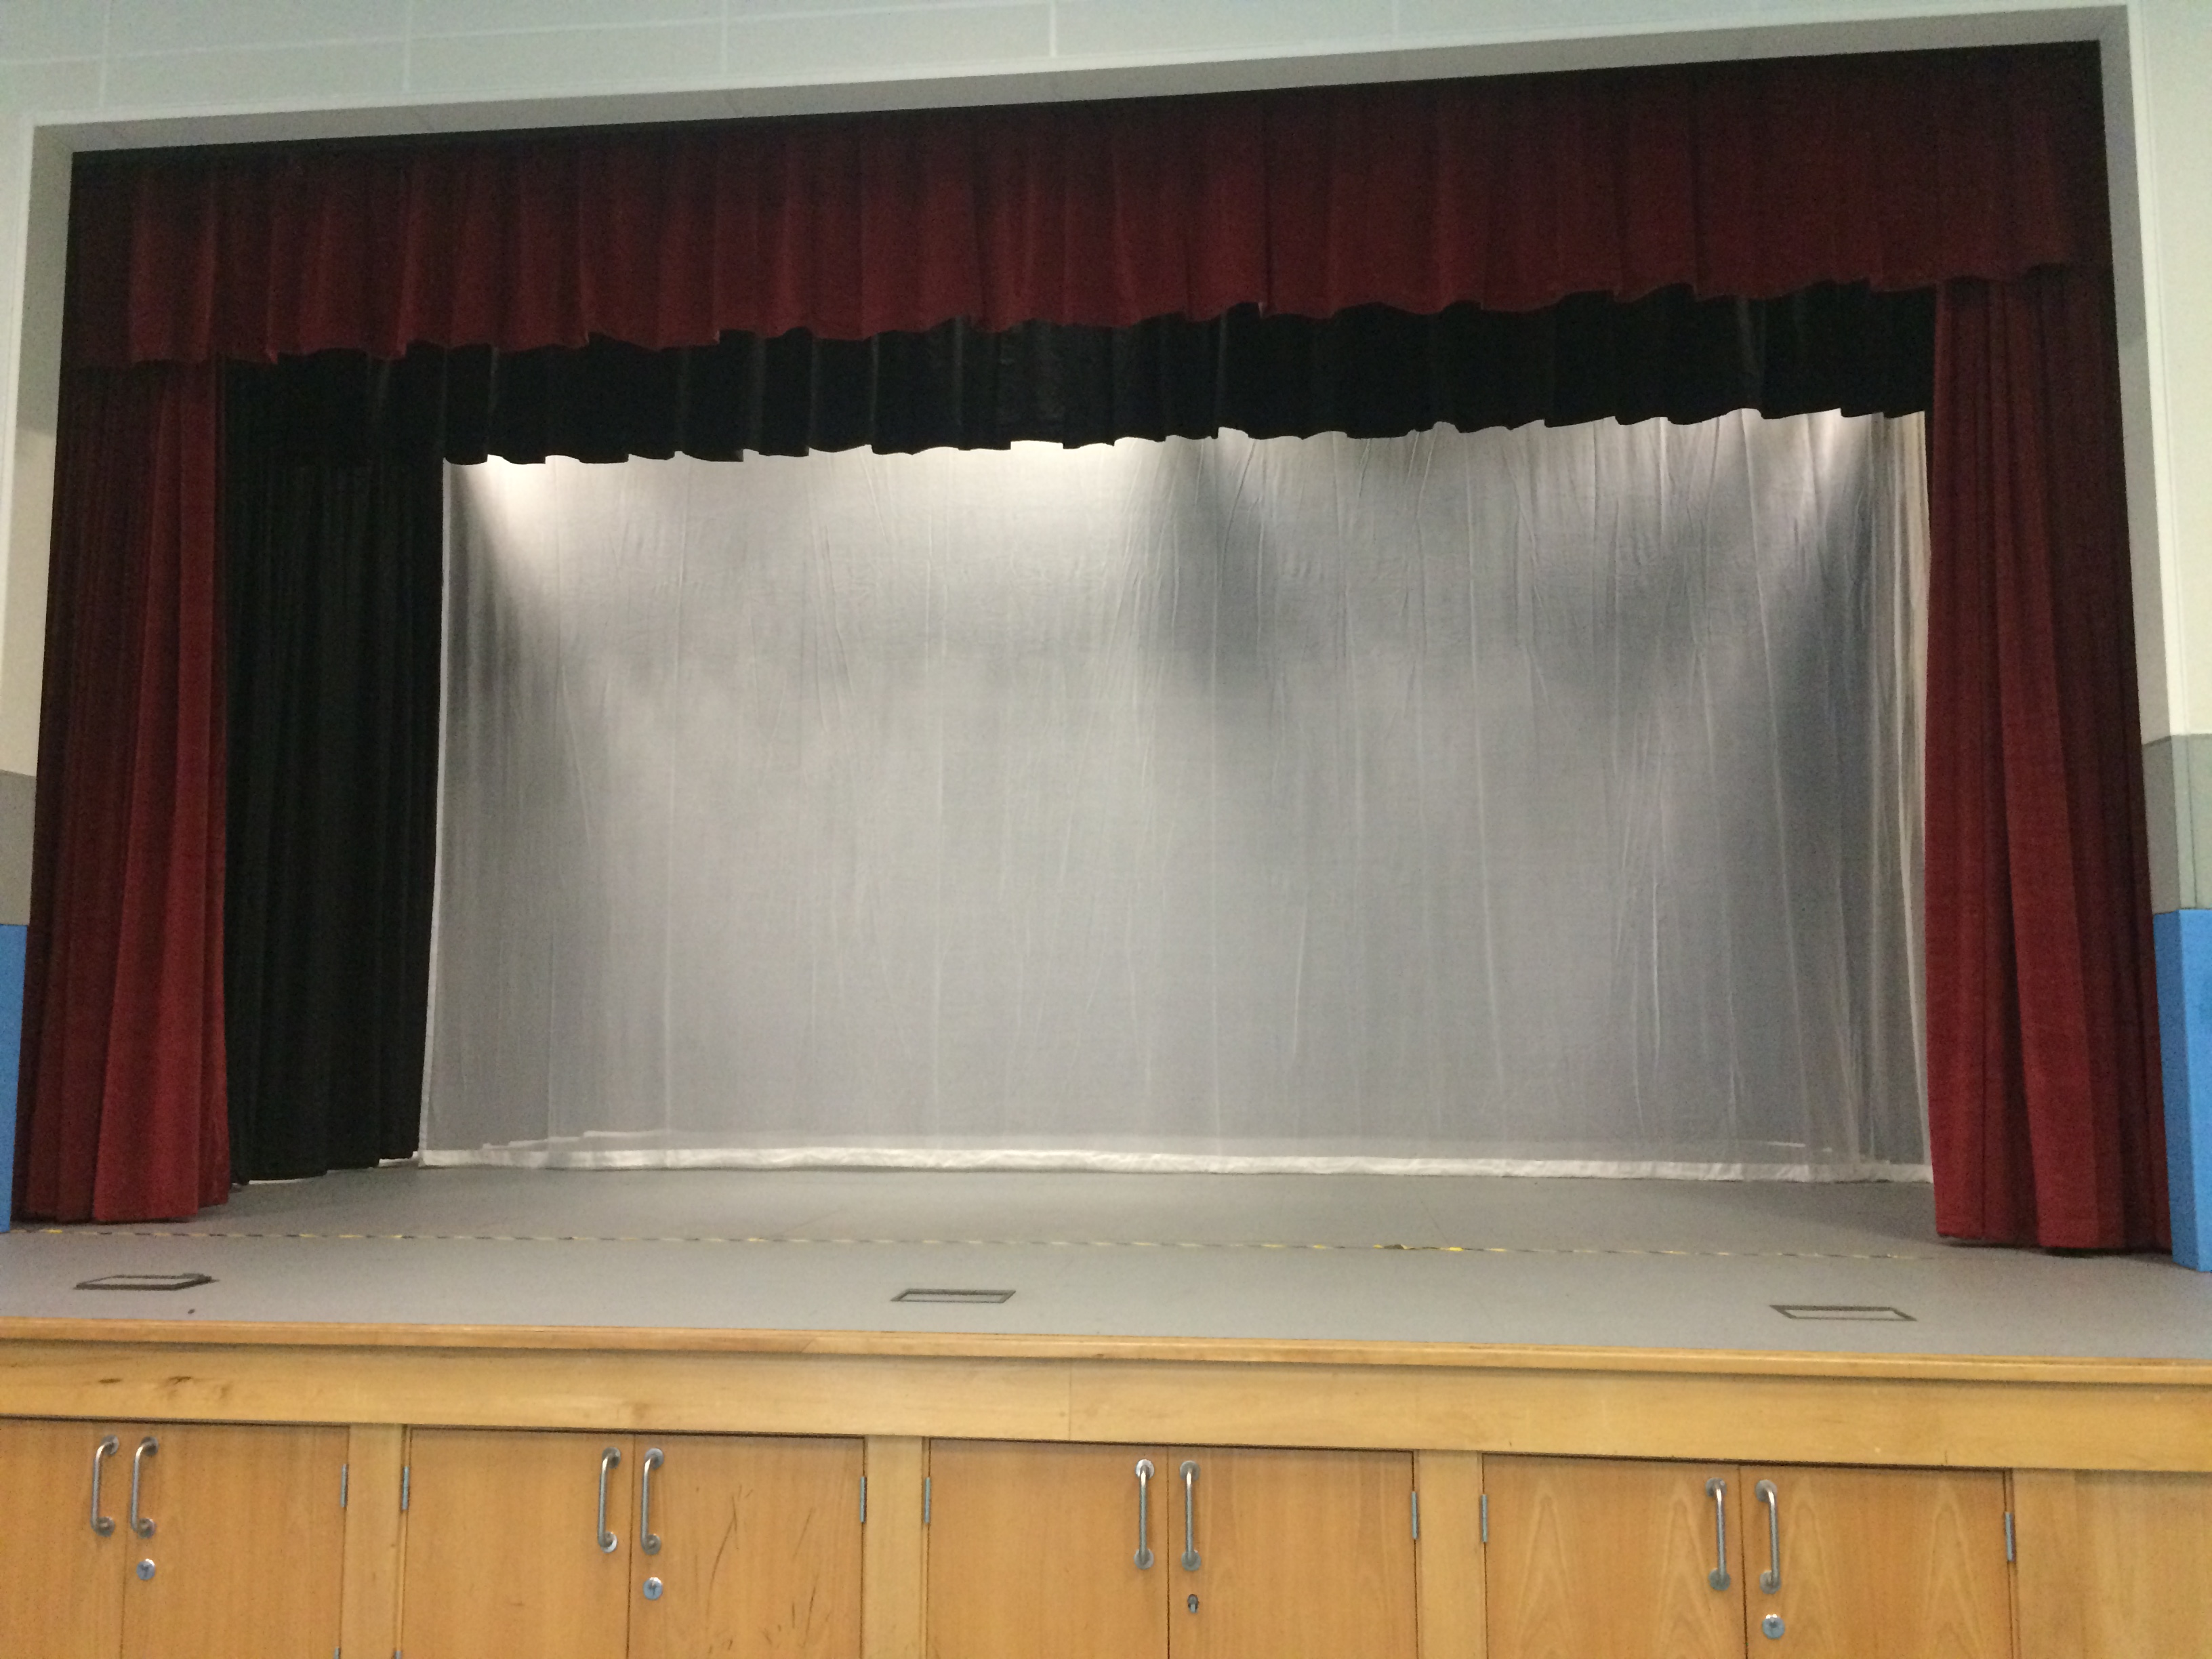 Stage showing use of gauze fabric